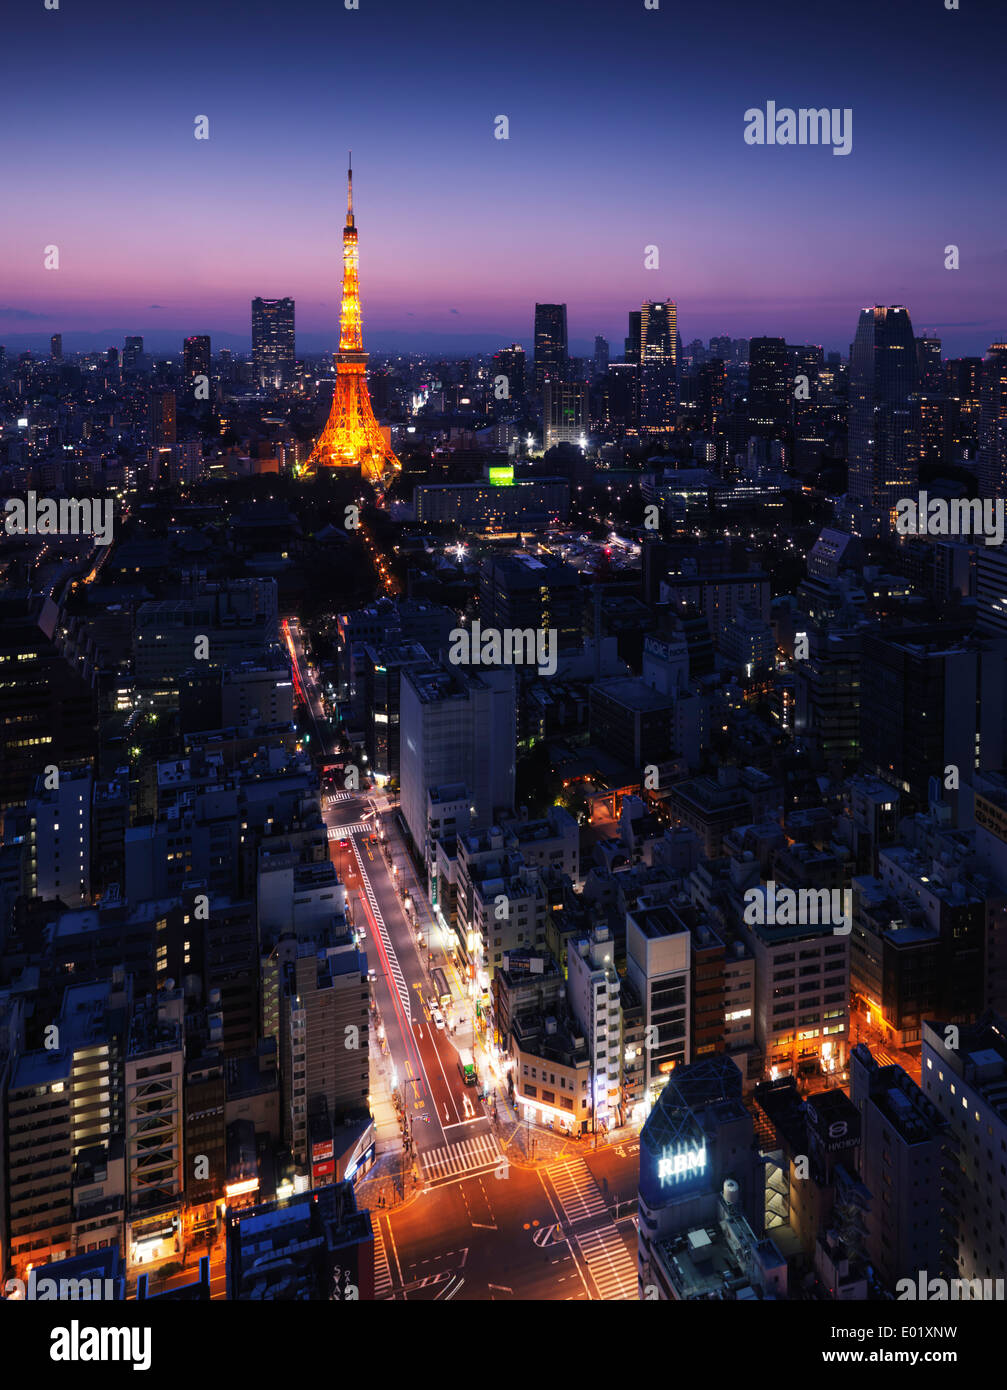 Brightly lit Tokyo tower illuminated at nighttime in cityscape with  colorful twilight skies. Minato, Tokyo, Japan Stock Photo - Alamy